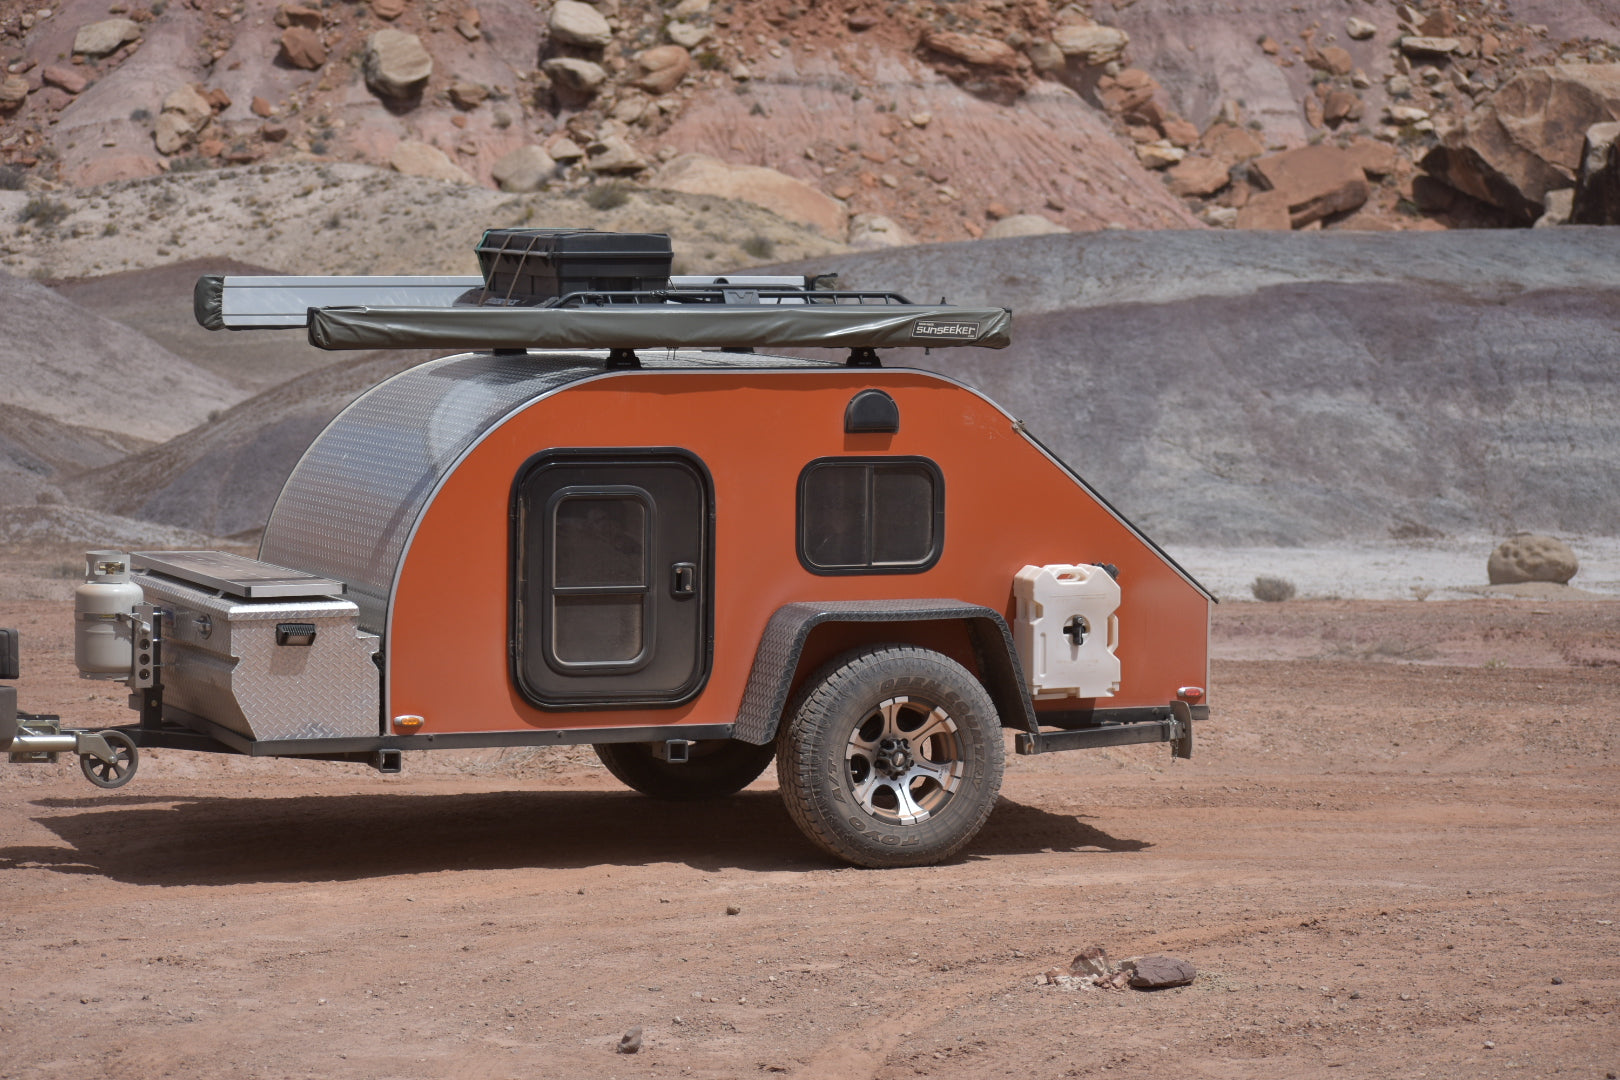 Featured Article: "6 Rad Off-Road Teardrop Campers: Bubbly Trailers Gone (Into the) Wild" from motortrend.com